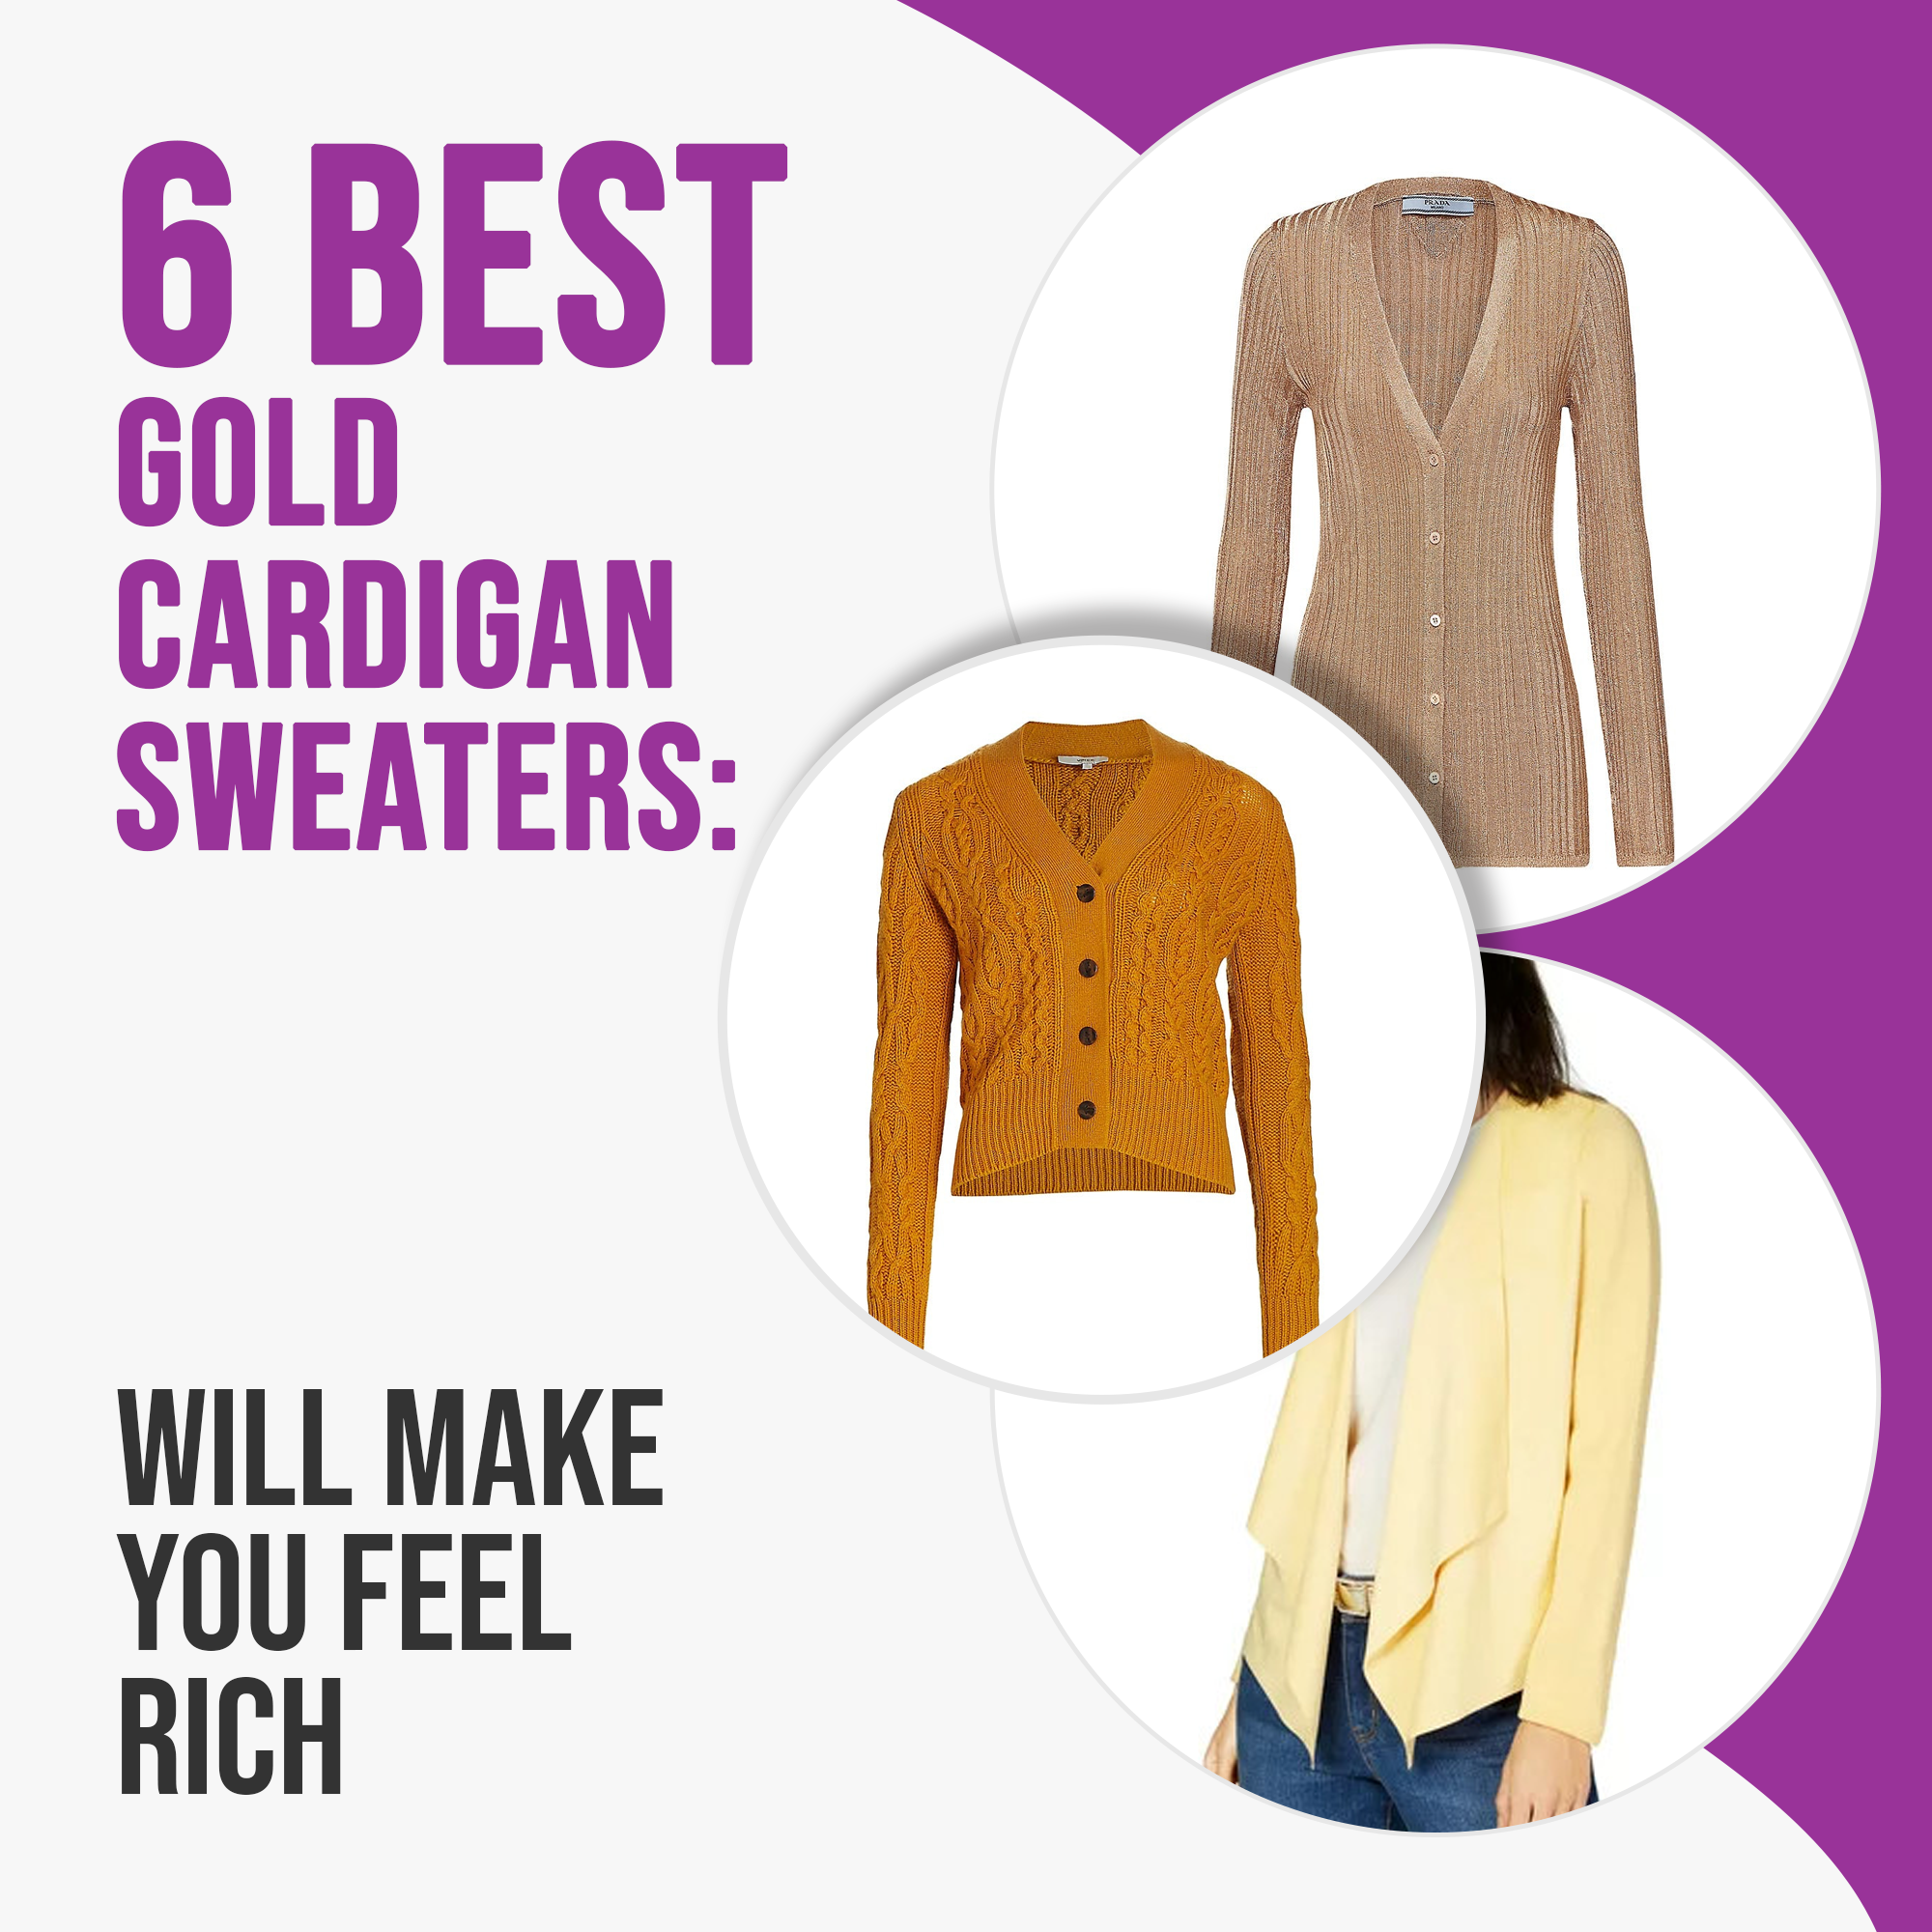 6 Best Gold Cardigan Sweaters: Will Make You Feel Rich